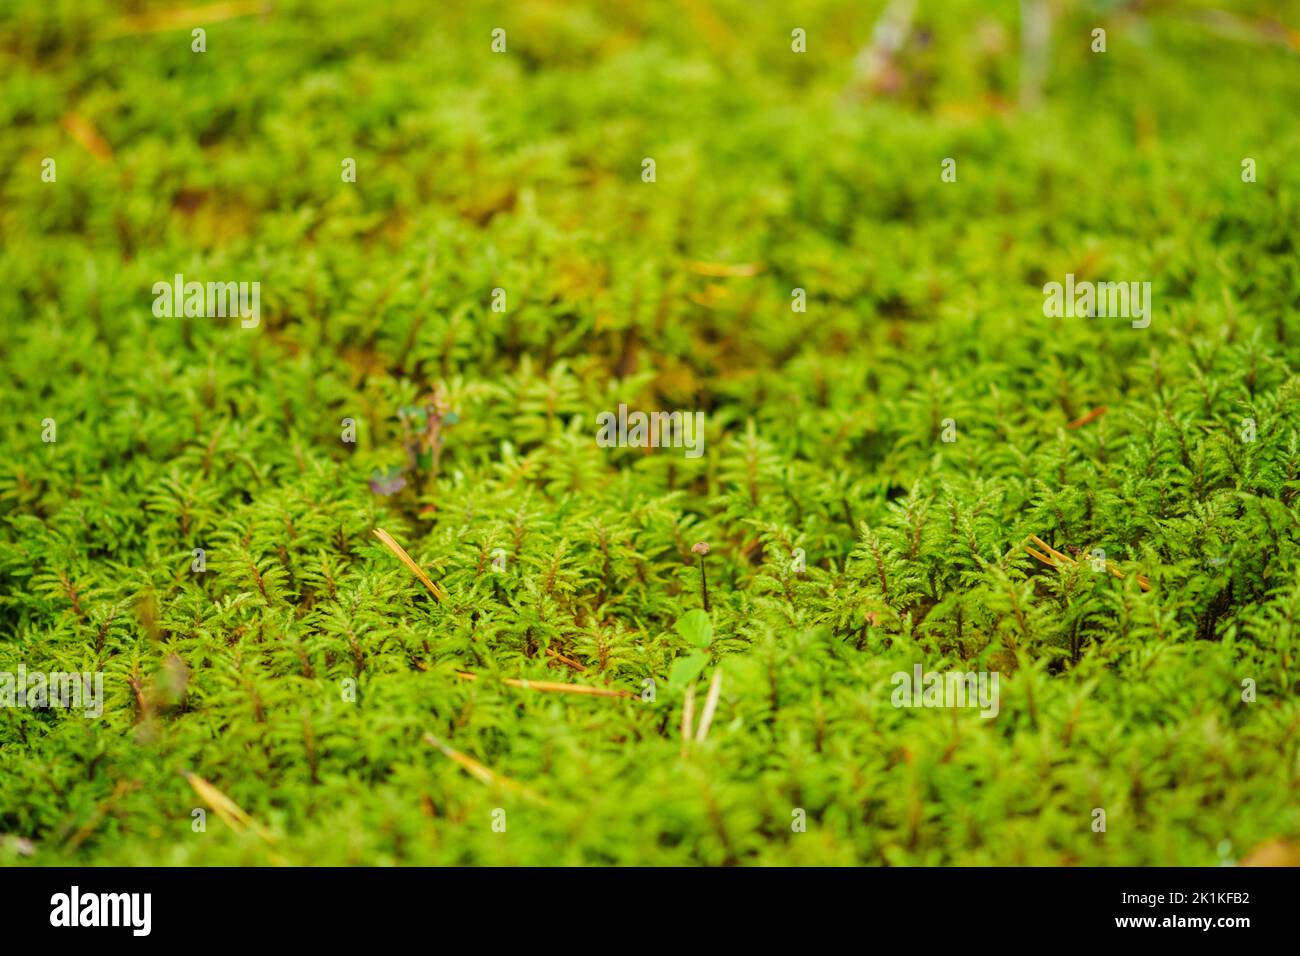 Beautiful background with green moss or musk and variety of little plants and leaves on the ground in the undergrowth of a forest or woods in autumn Stock Photo